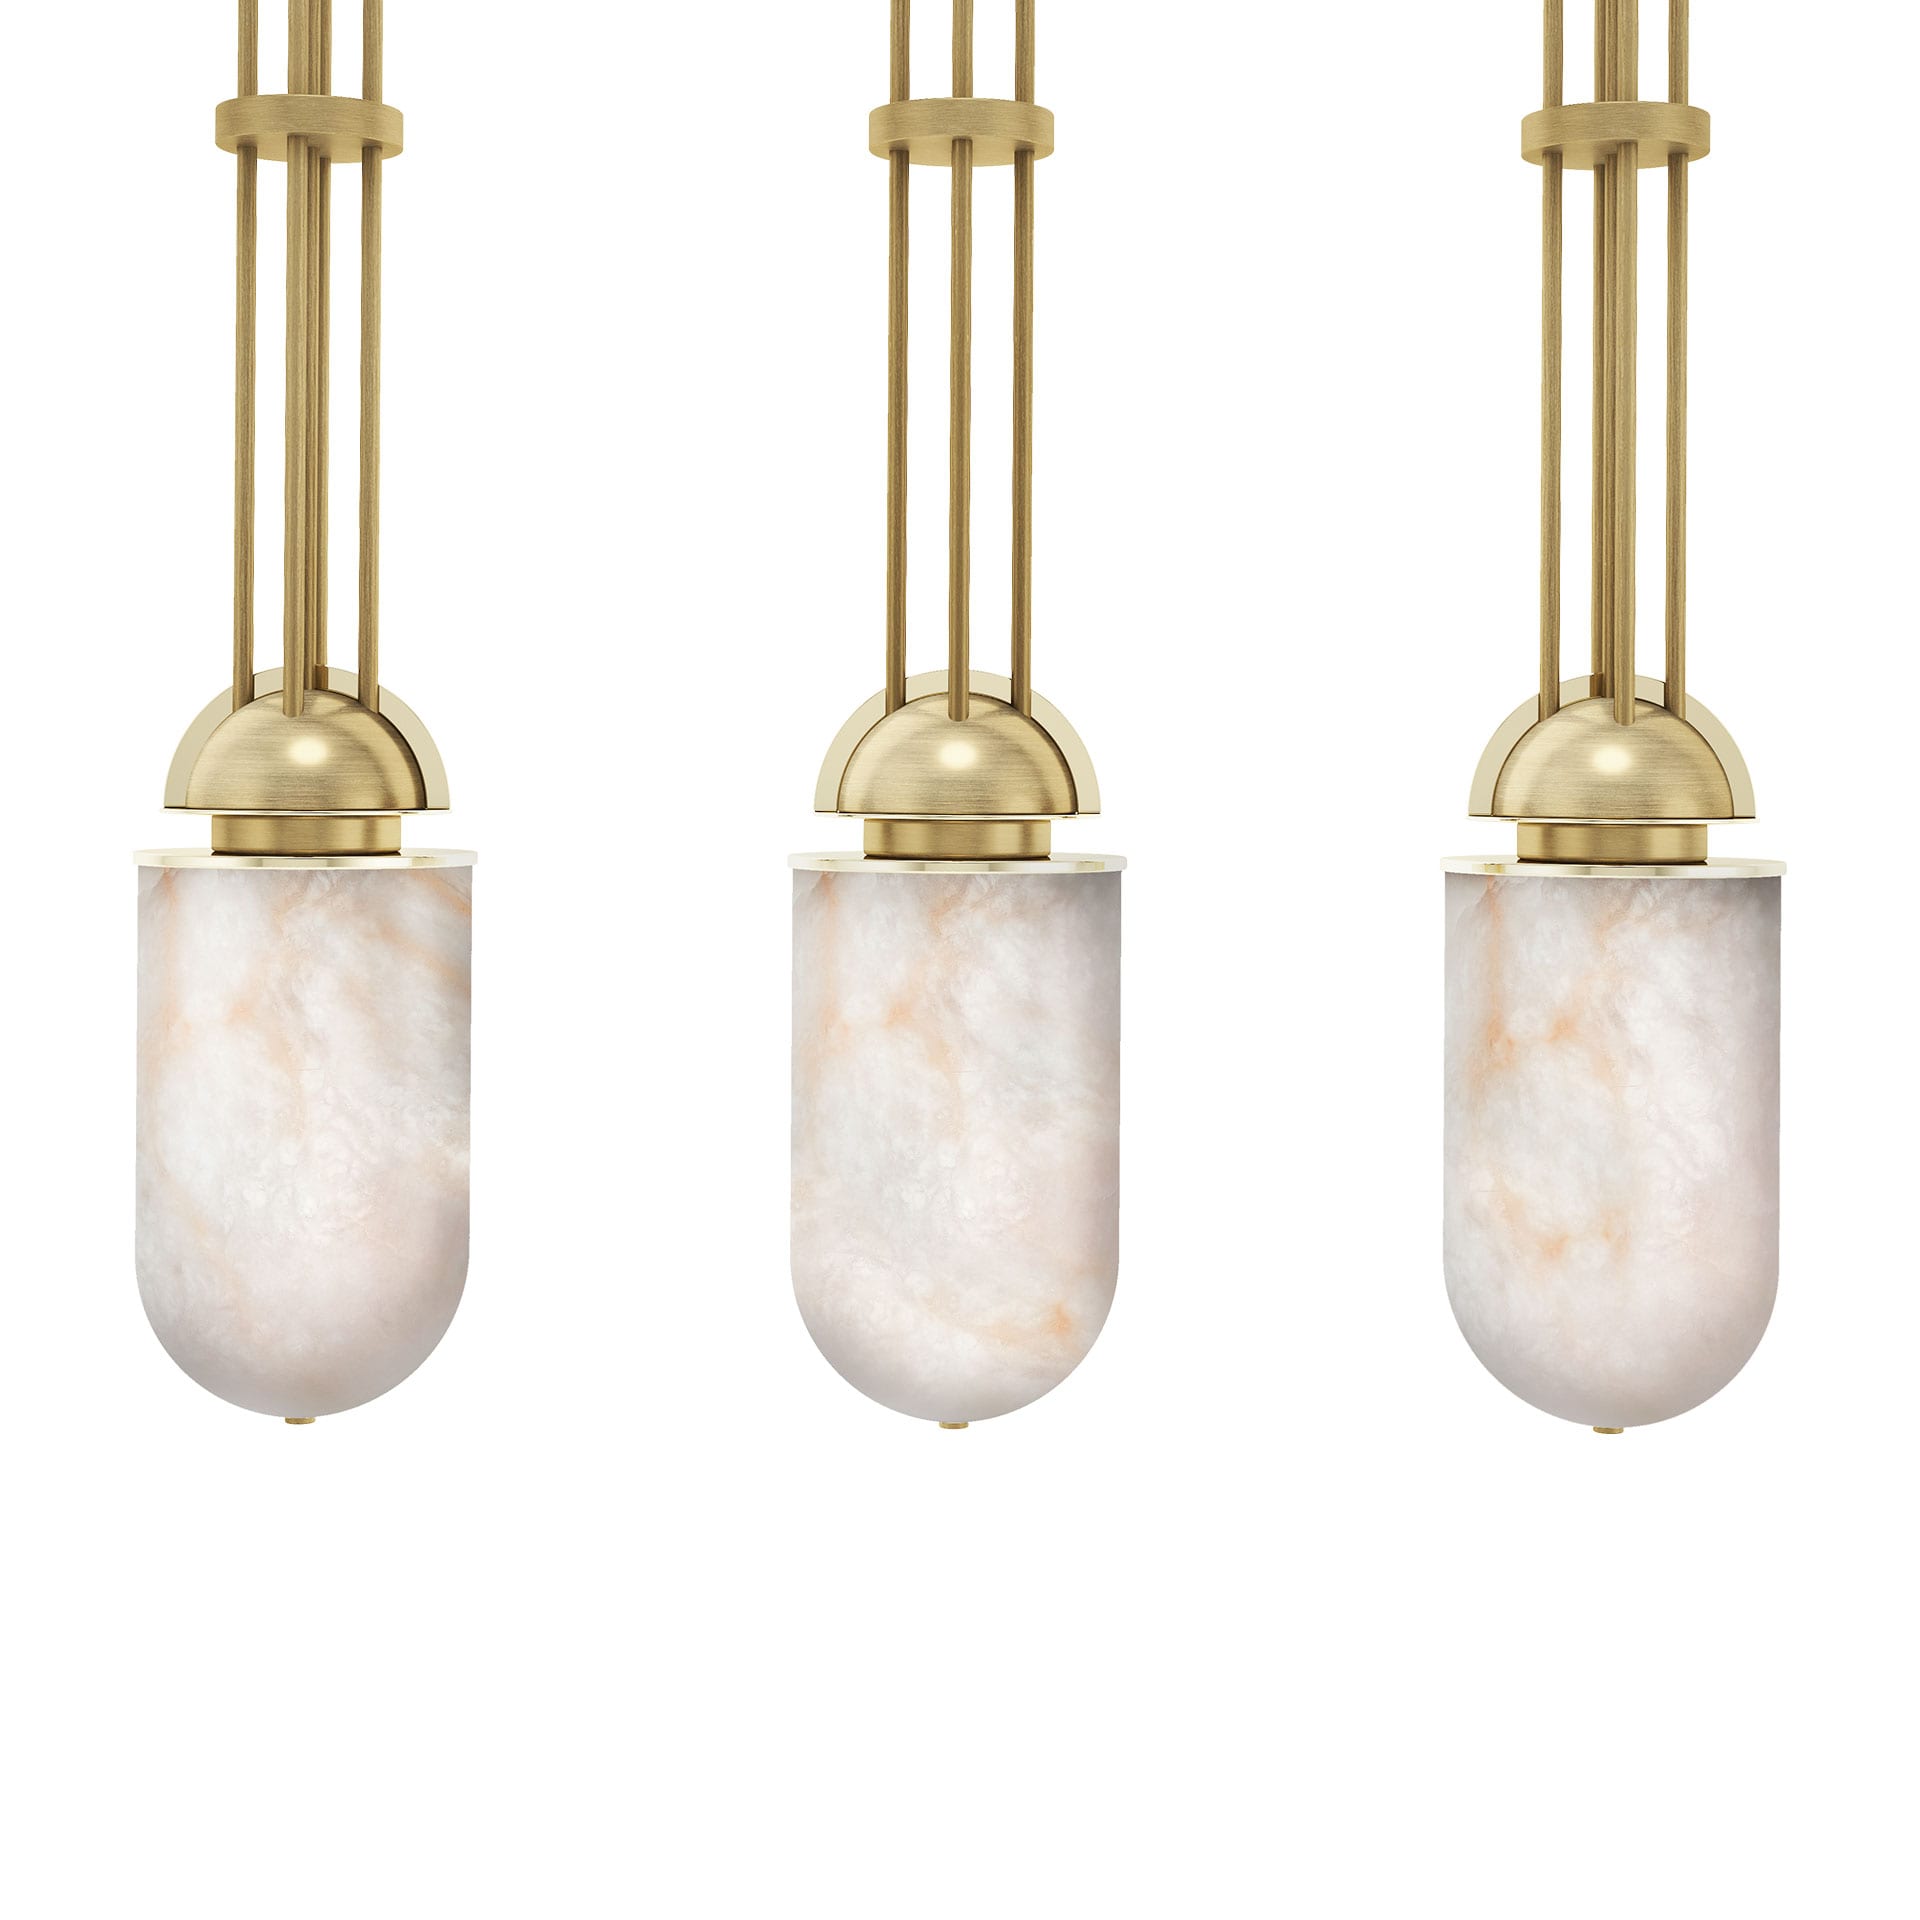 Russell suspension lamp